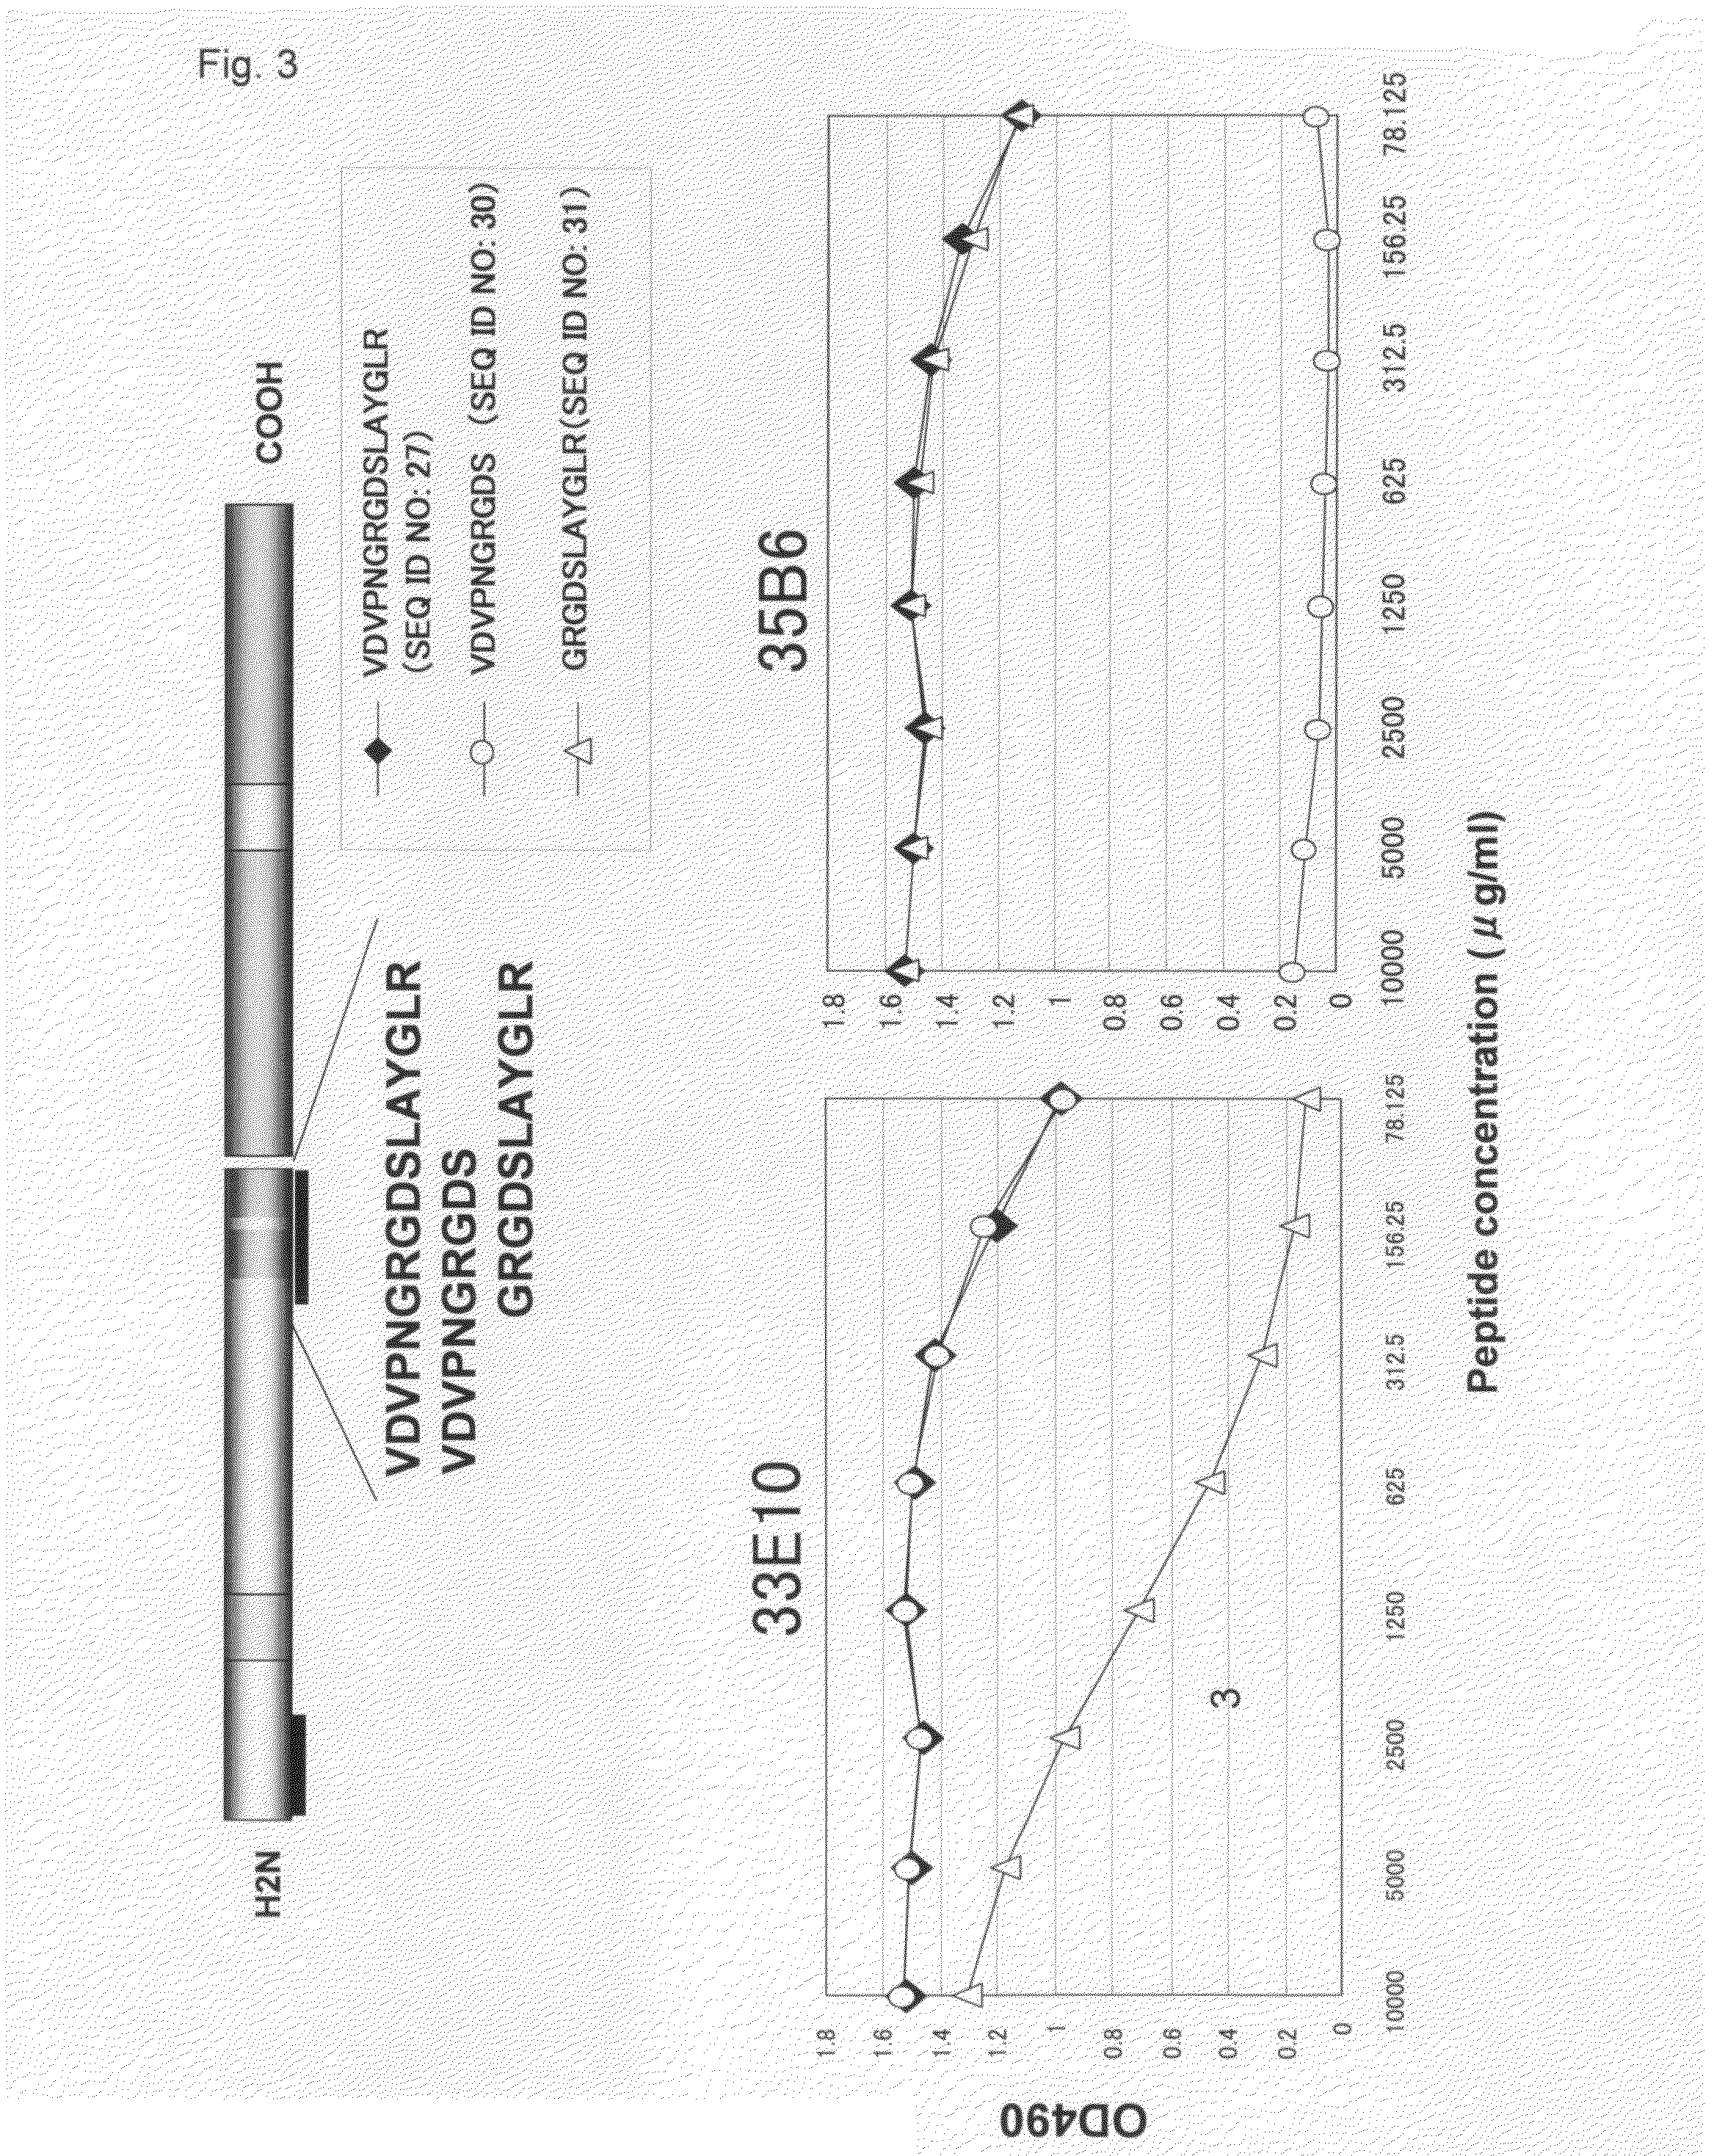 Antibody against rgd in amino acid sequence of extracellular matrix protein and production method and use of the same